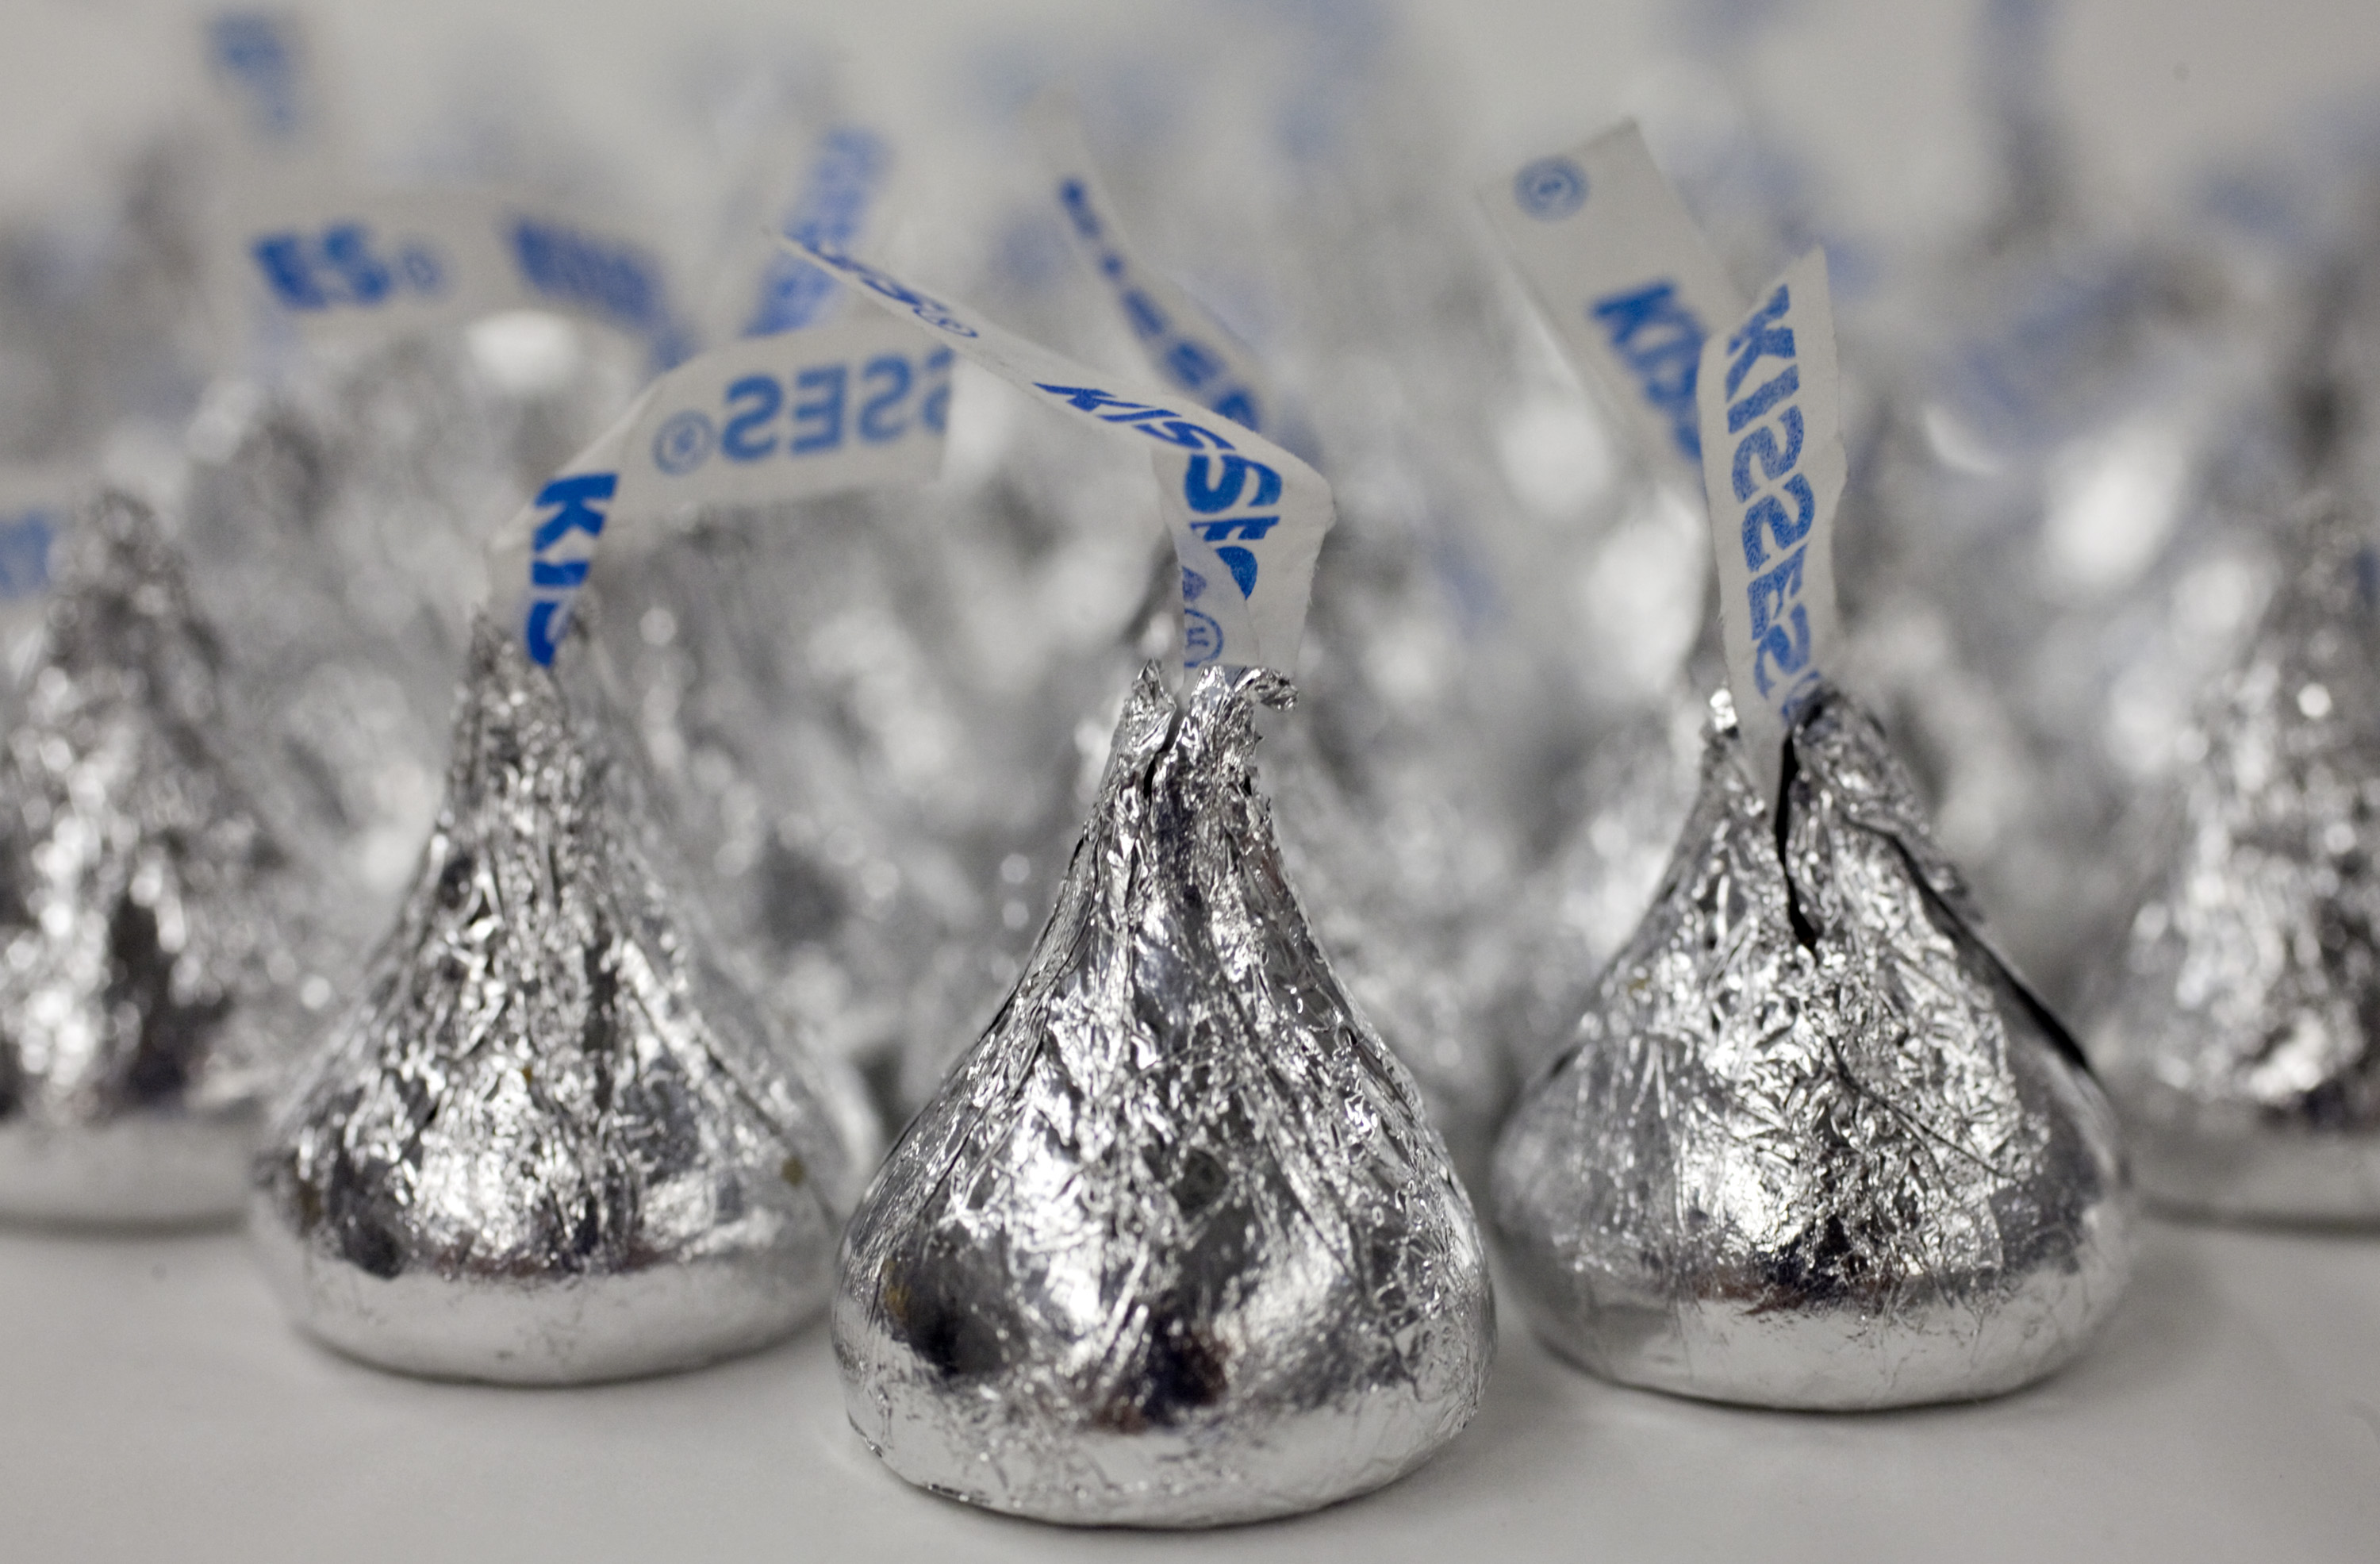 Hershey Co.'s chocolate kisses are displayed for a photograph in New York, U.S., on Thursday, Jan. 14, 2010. (Bloomberg via Getty Images)